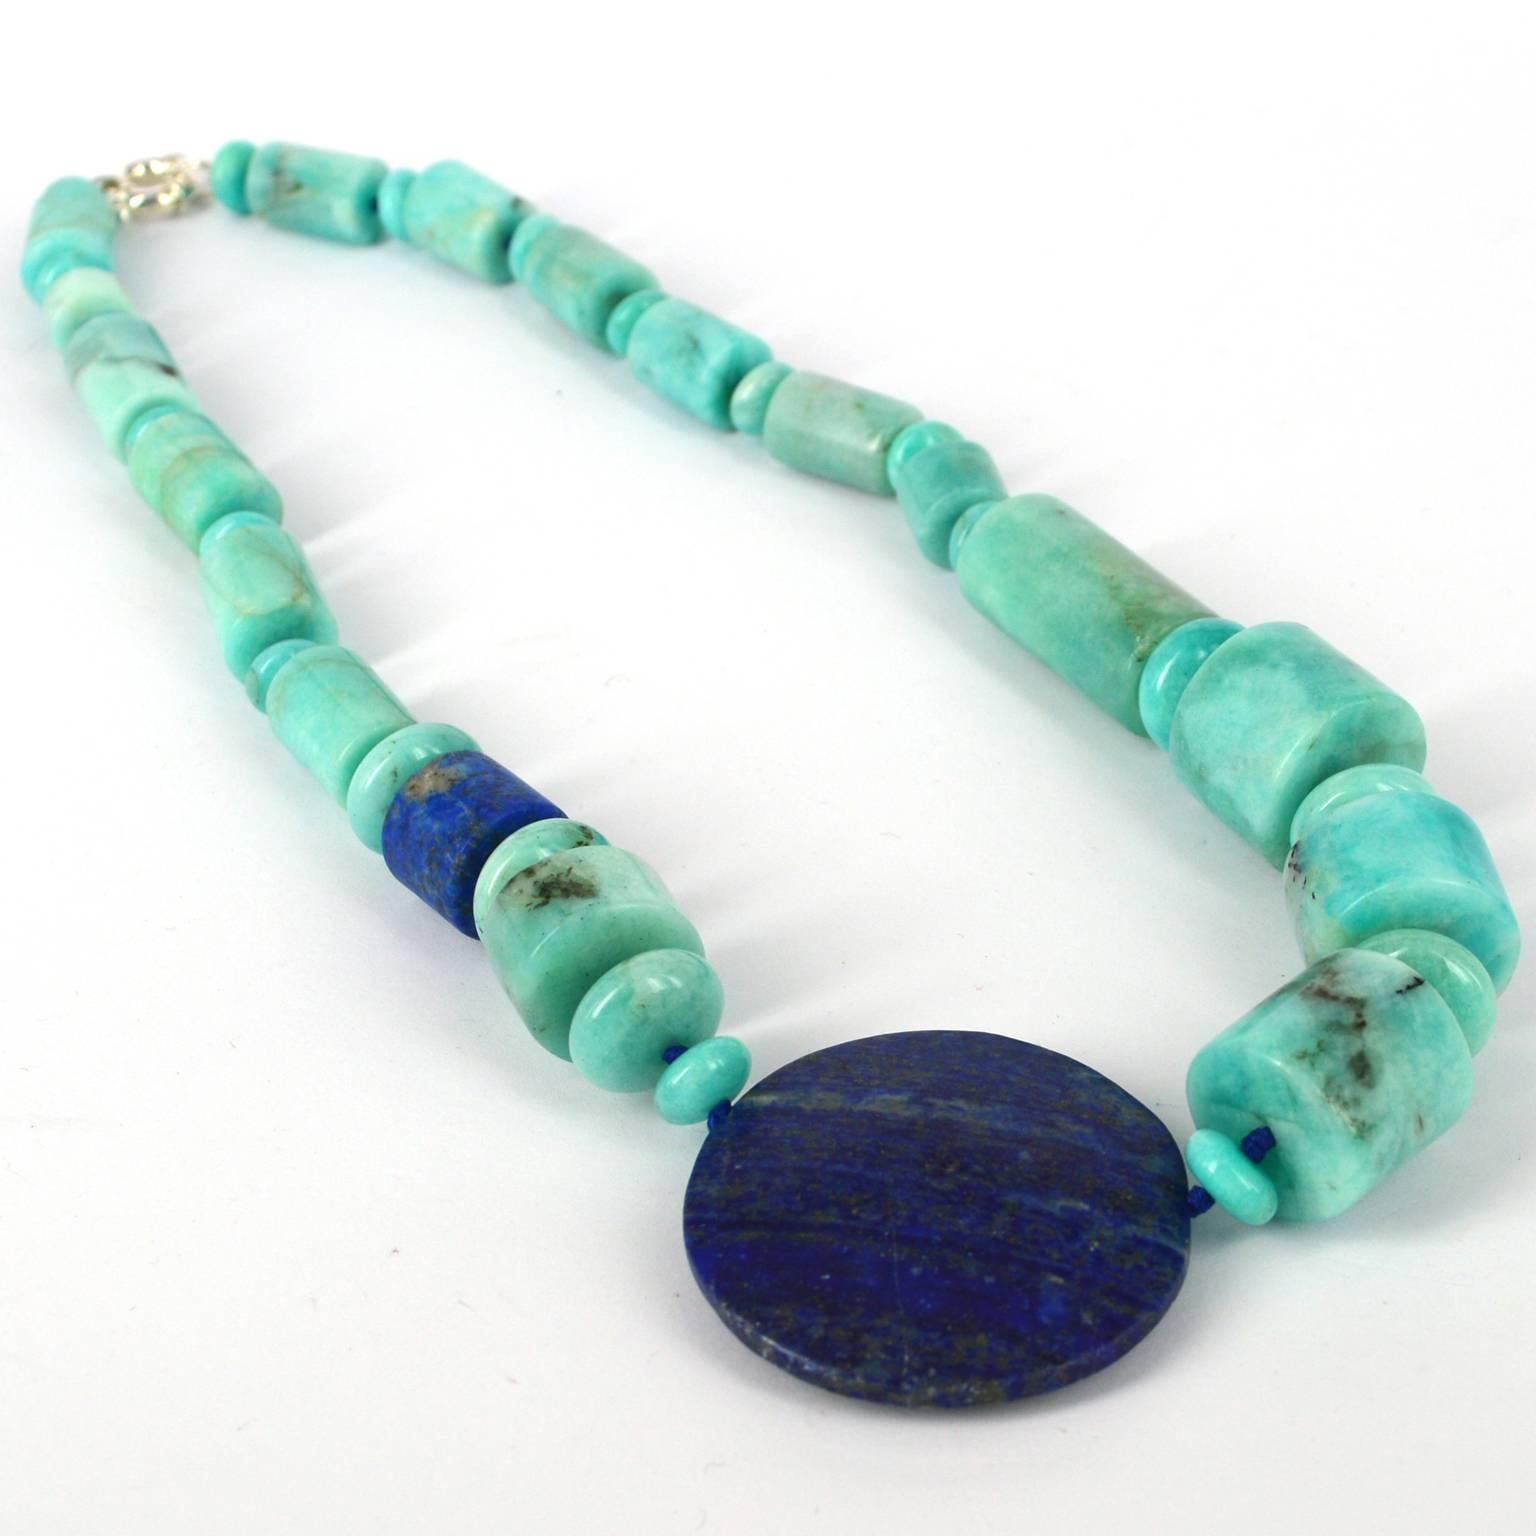 Round off-centre 45mm Drilled Matt Lapis Lazuli bead balances the Peruvian Amazonite Rondels and tubes. Amazonite tubes range from 12x18mm up to 20x18, knotted on Lapis Lazuli coloured thread with a 15mm Sterling Silver Bolt Clasp. 
Finished